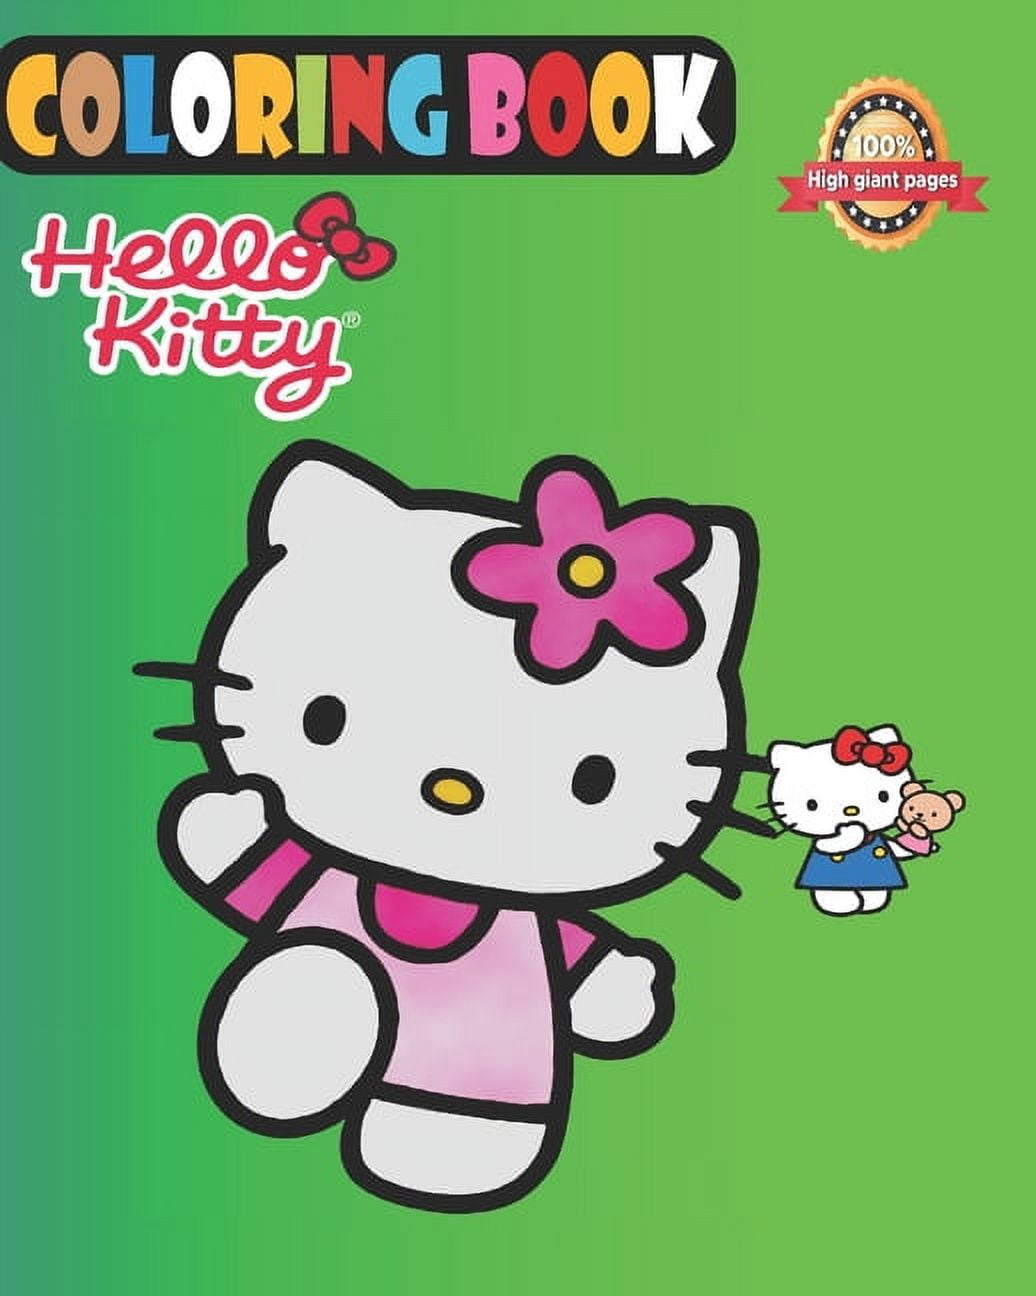 Hello Kitty Coloring Book For Kids: Beautiful Kitty Illustrations for  Little Girls Boys Teens Children and Kids to Color (Paperback)